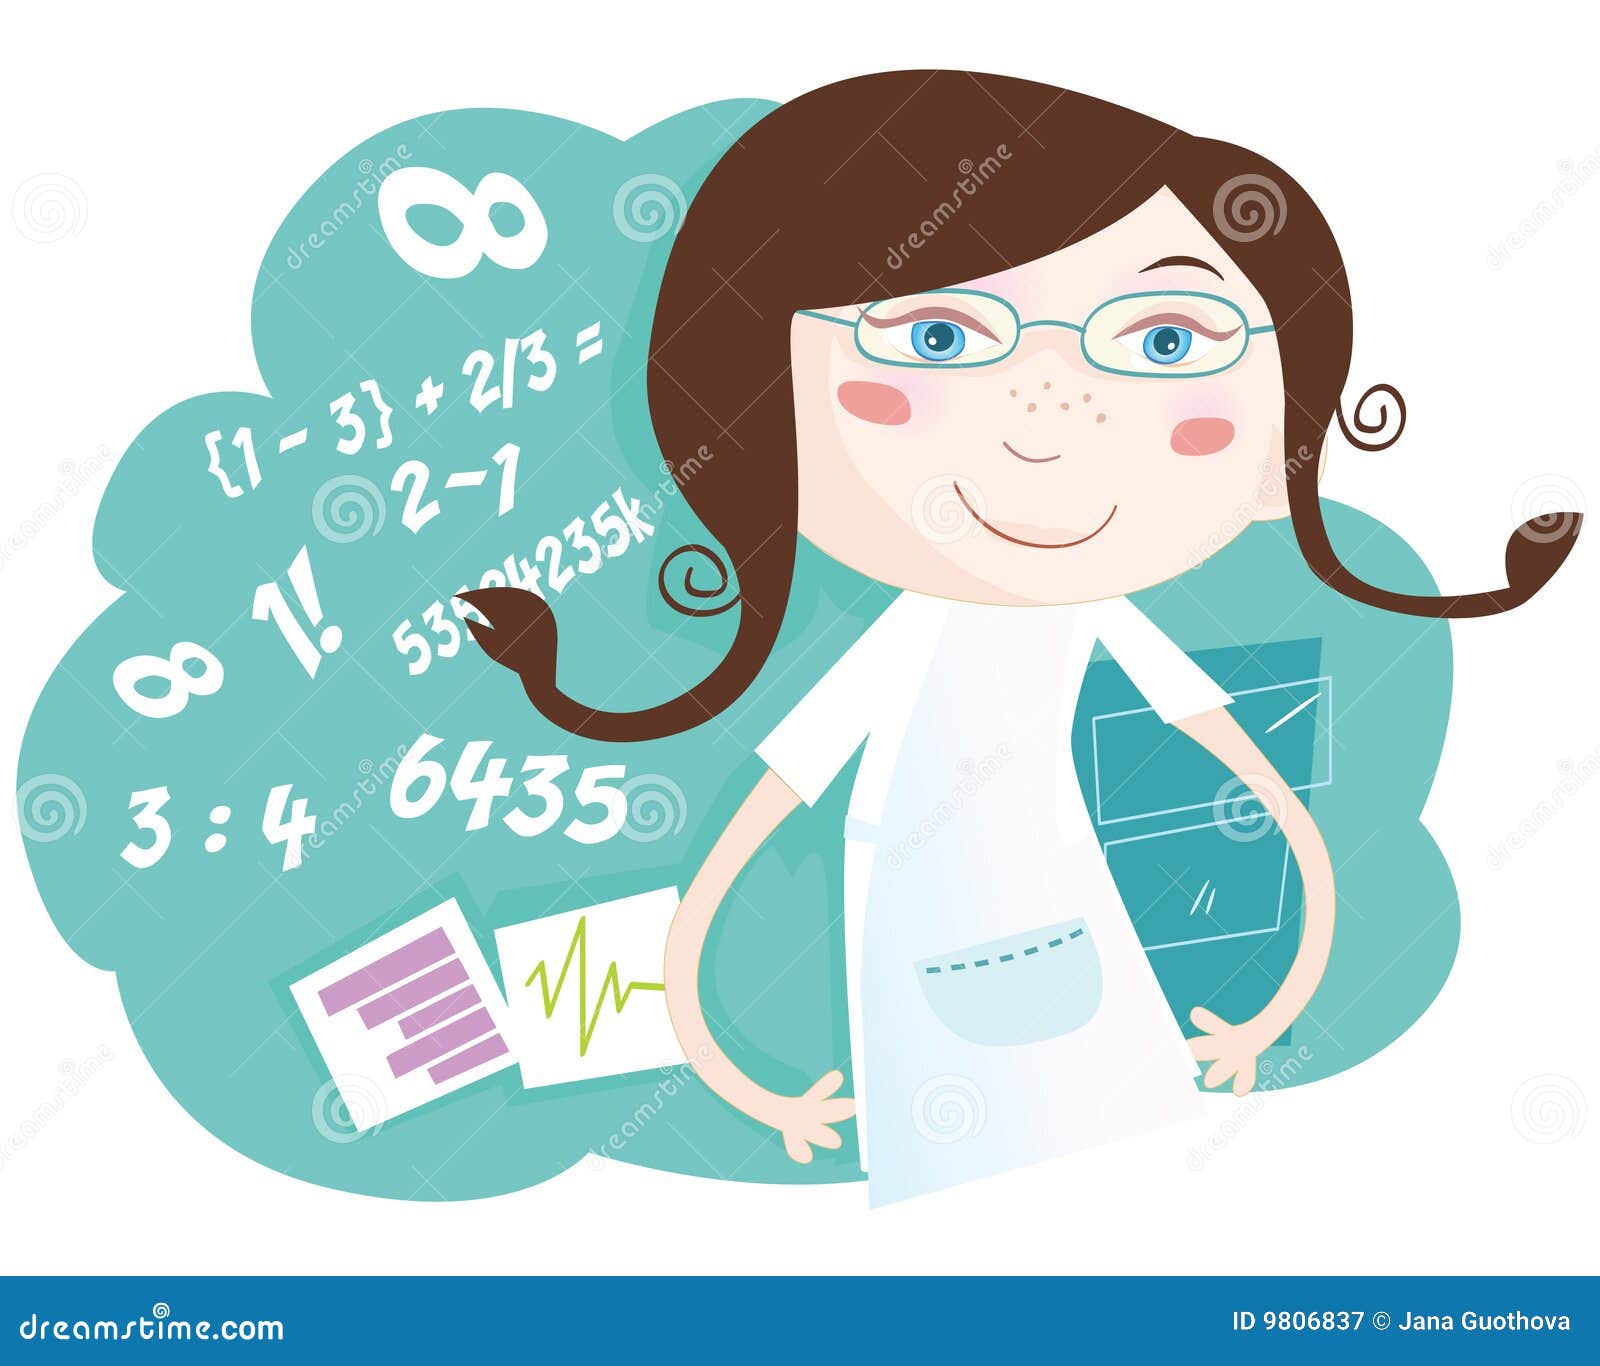 Numbers Stock Illustrations – 285,238 Numbers Stock Illustrations, Vectors  & Clipart - Dreamstime